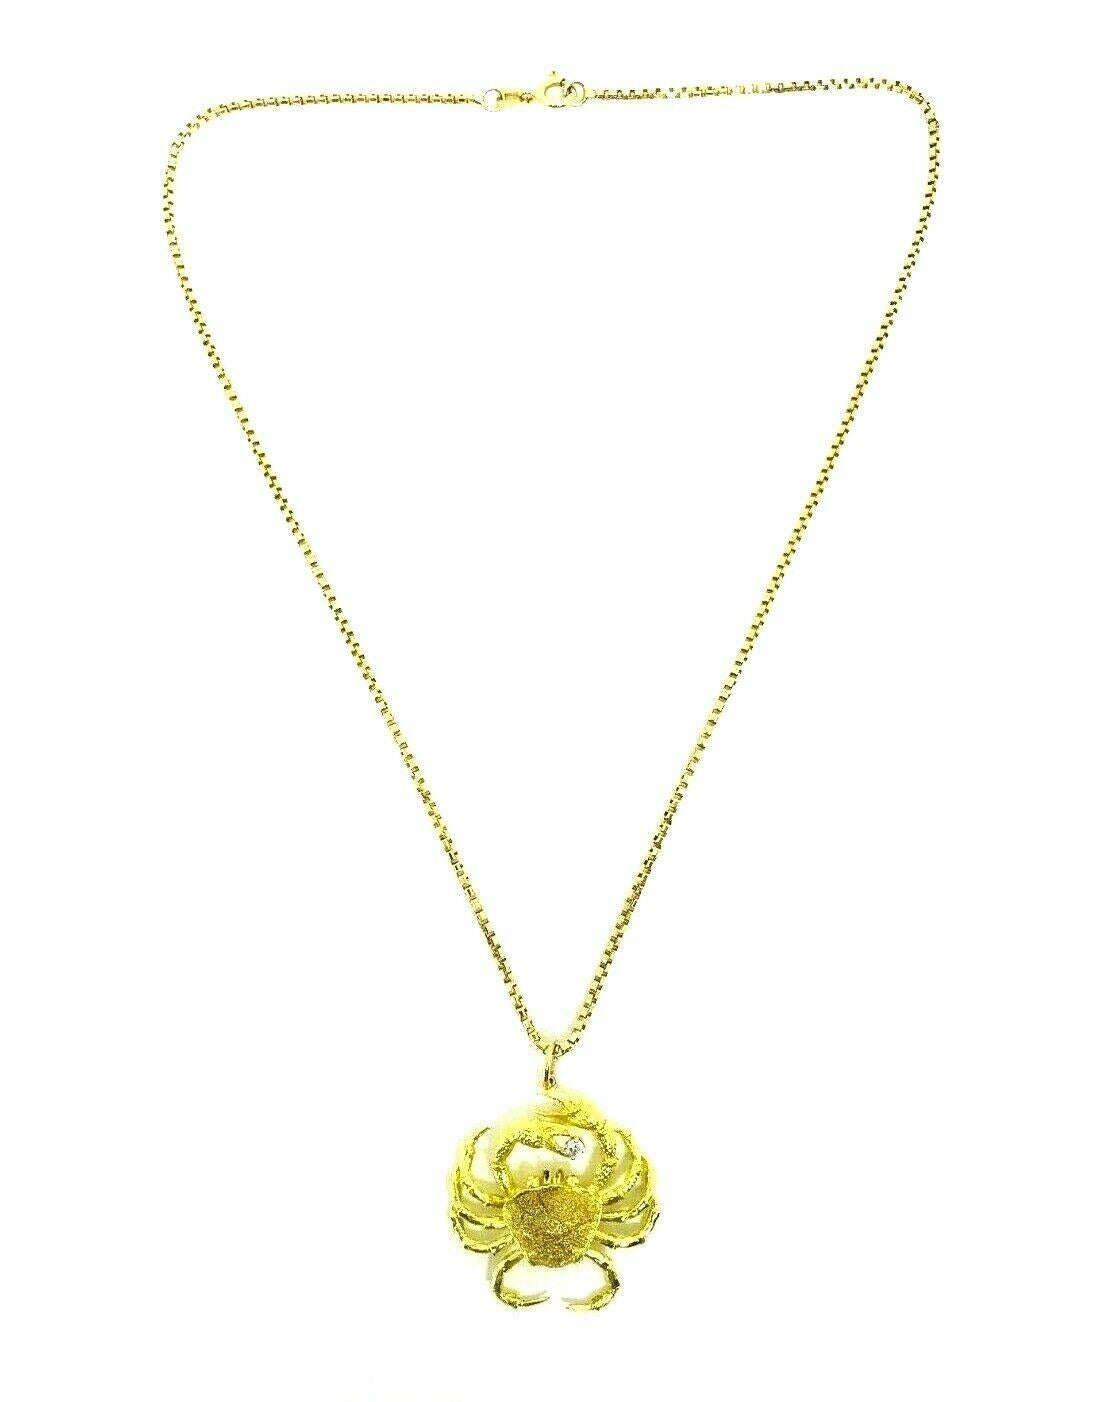 Modern artisan crab/cancer pendant made of 18k yellow gold features diamond. Comes with a 14k yellow gold box link chain necklace. Diamond is round brilliant cut, carat weight is approximately 0.15 points. 
The pendant stamped with a maker's mark